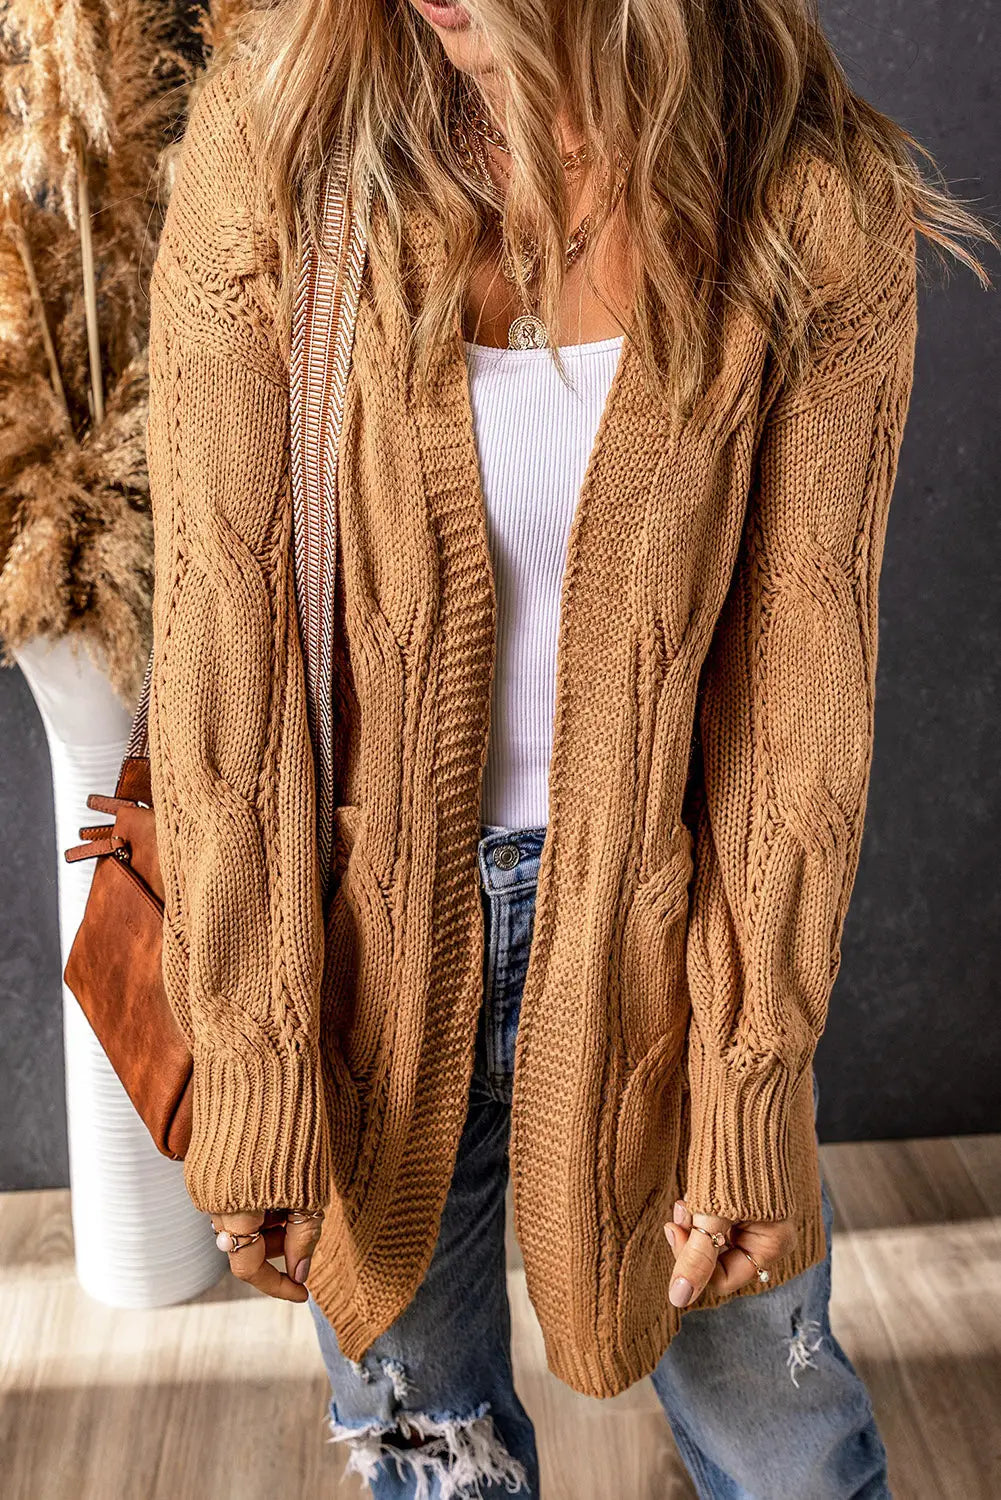 Apricot ribbed trim eyelet cable knit cardigan - tops